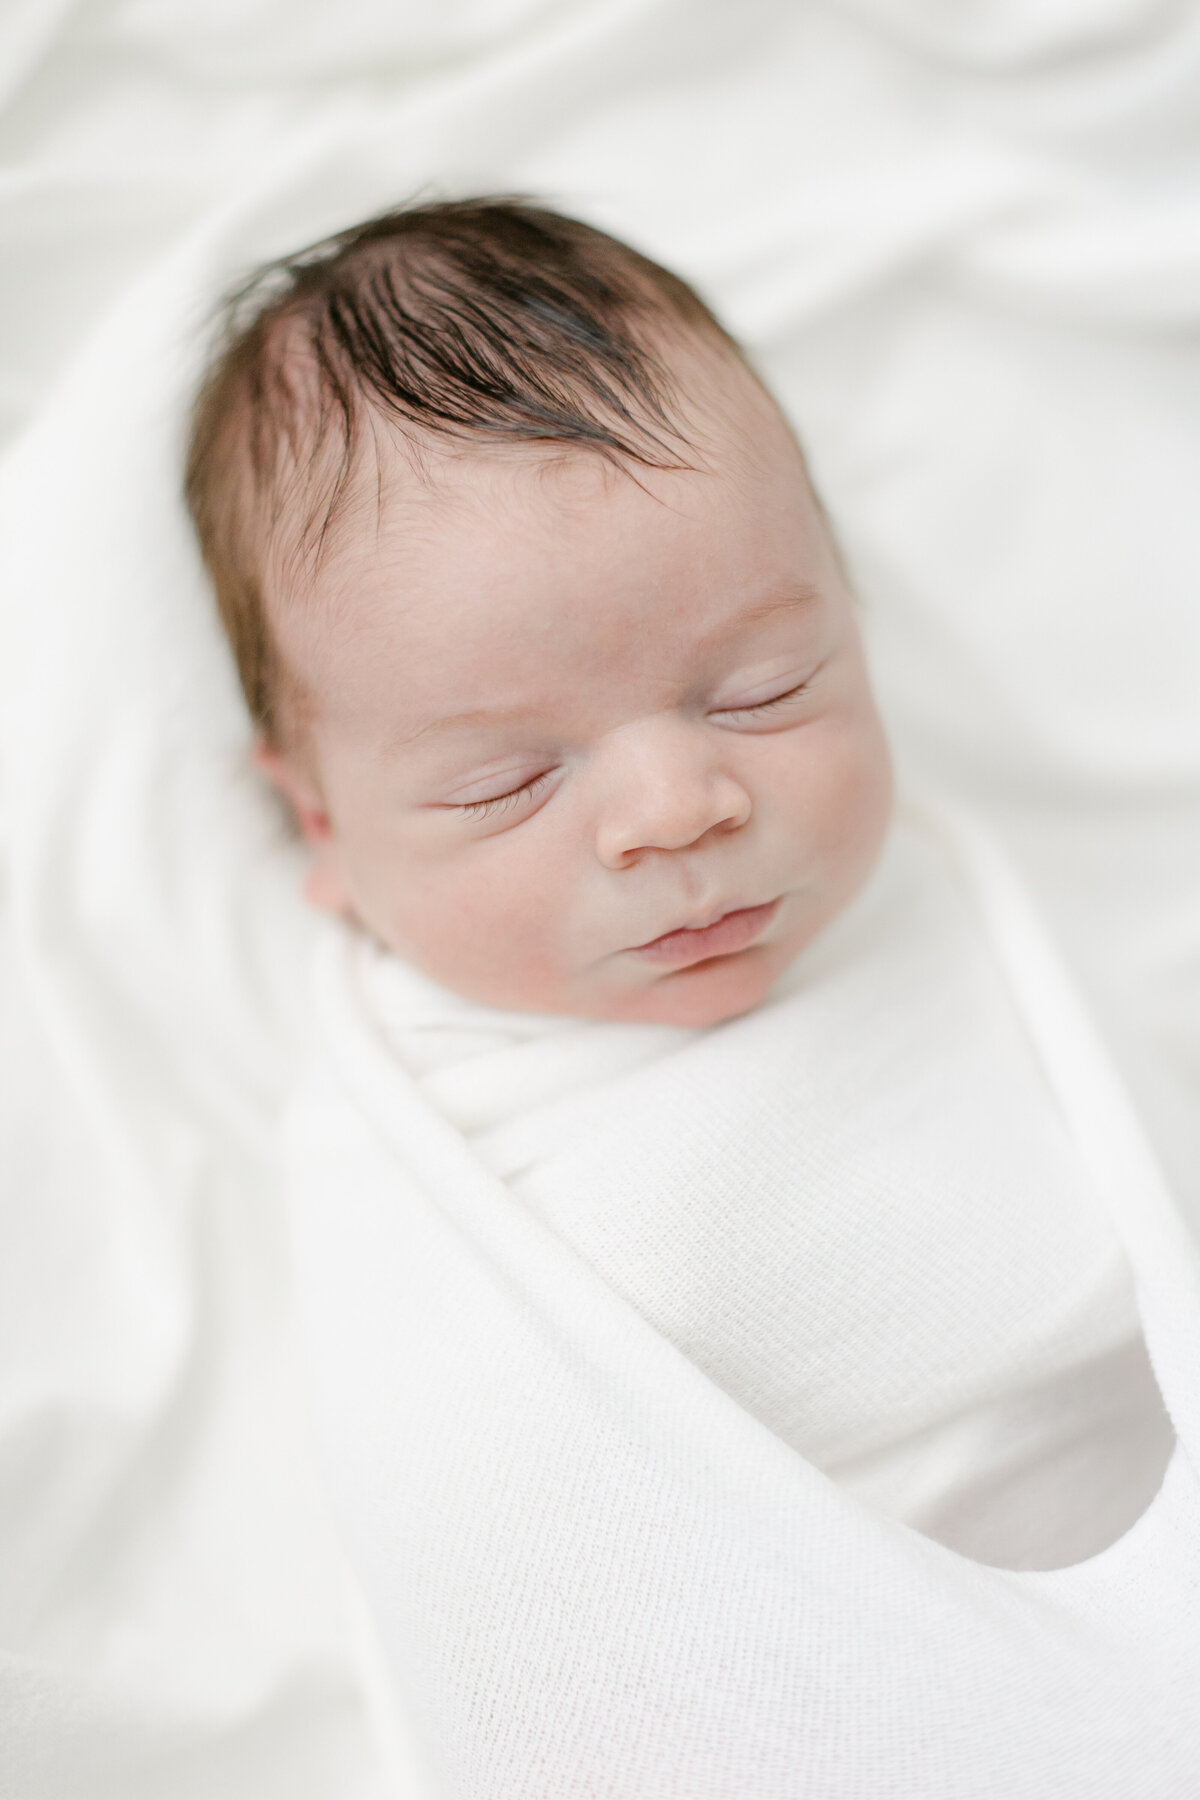 close up shot of baby's face highlighting his tiny features photographed by Philadelphia Newborn Photographer Tara Federico